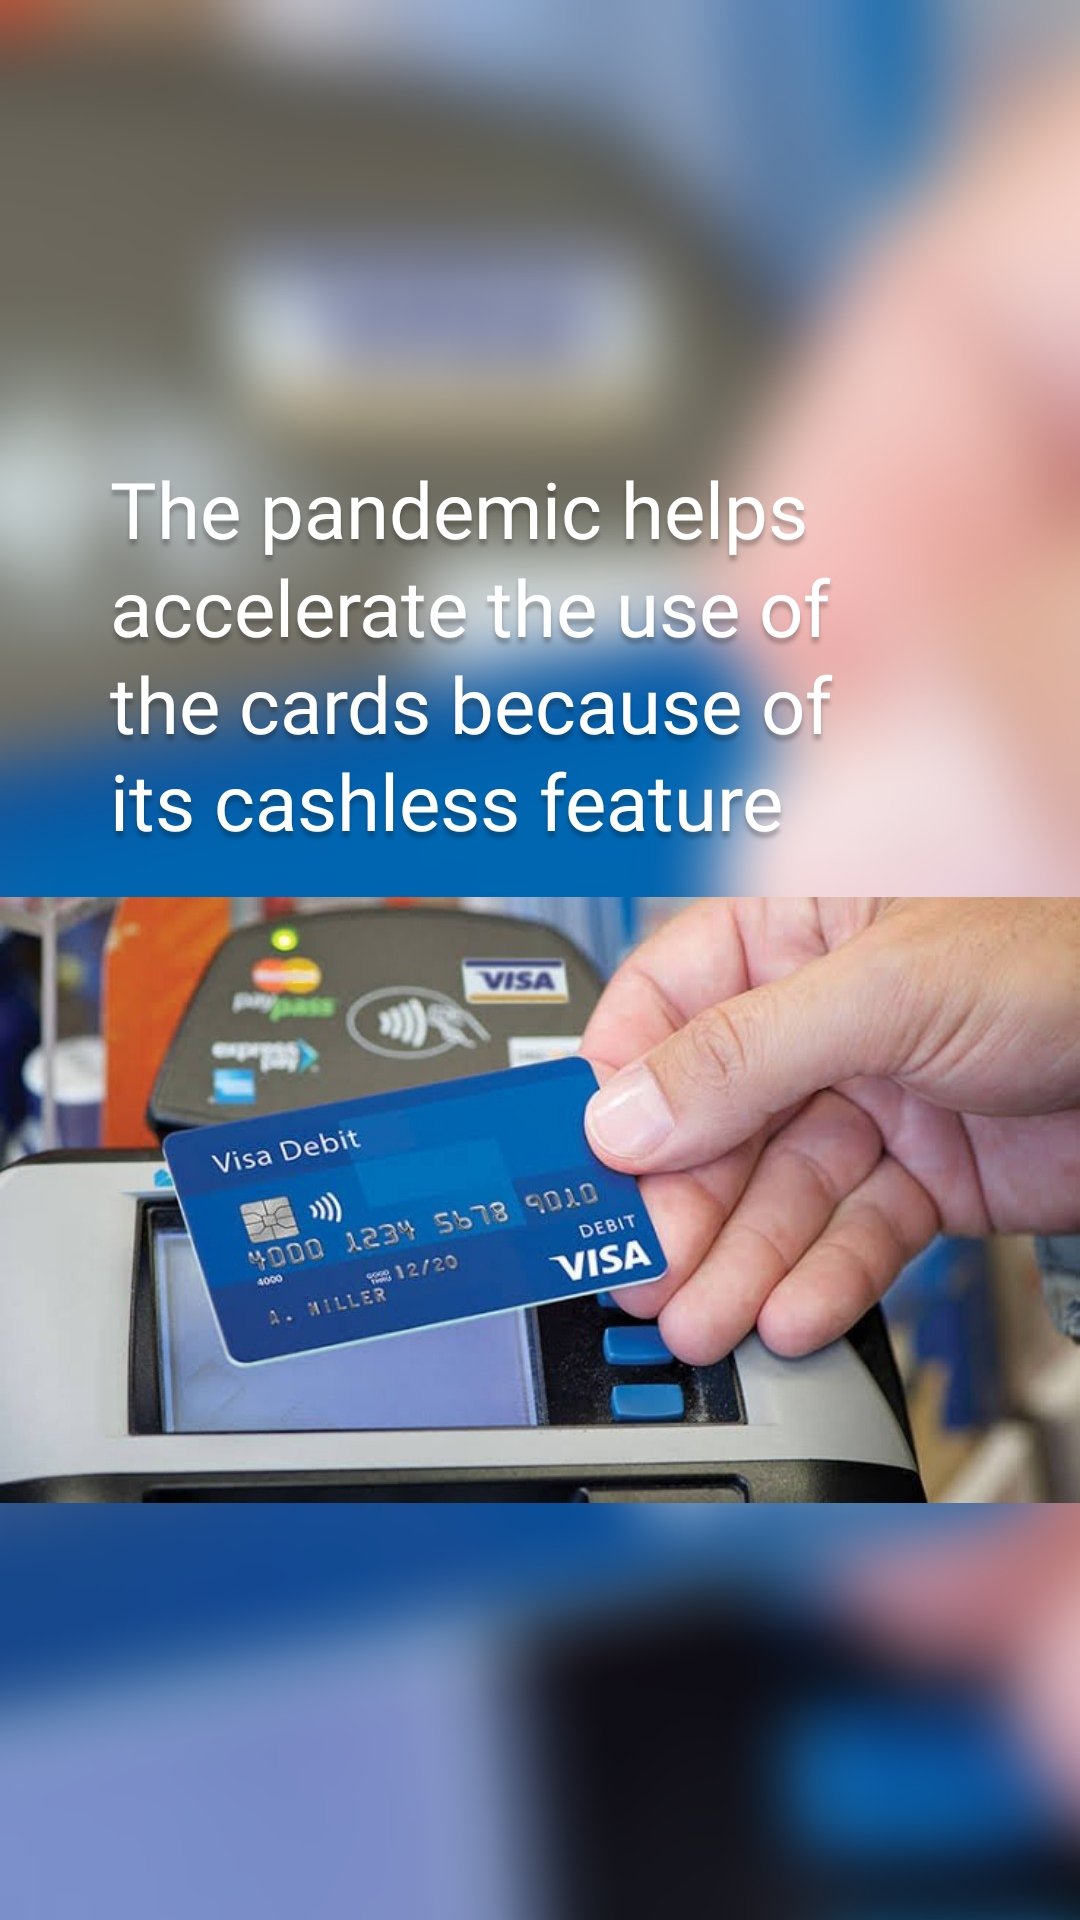 The pandemic helps accelerate the use of the cards because of its cashless feature 